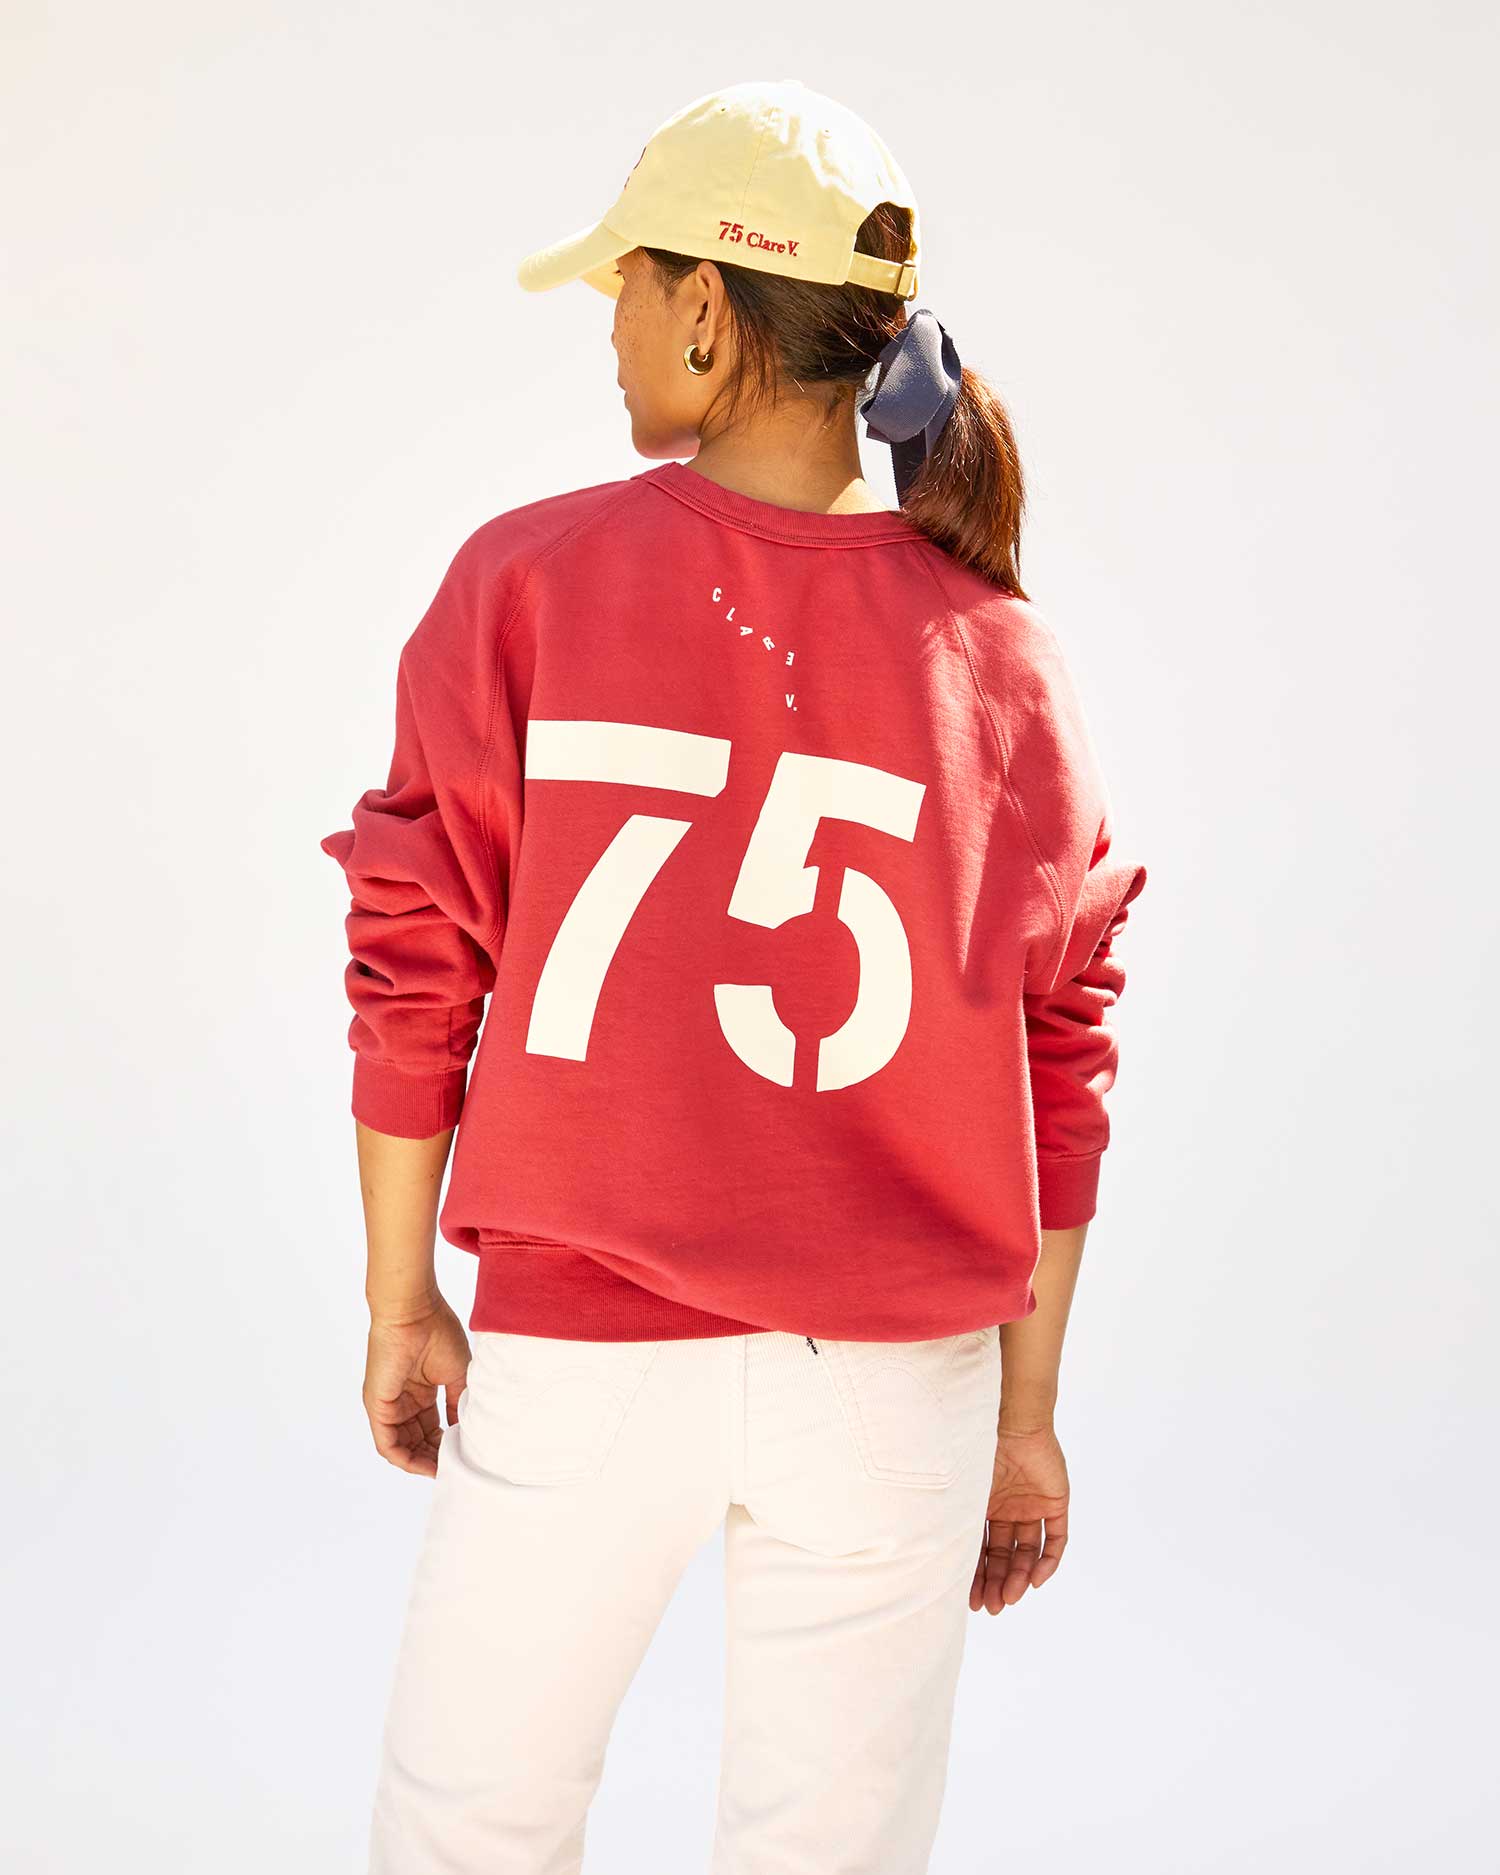 back view of Maly in the  Brentwood Red w/ Cream BCM Sweatshirt with white jeans and the BCM Baseball hat